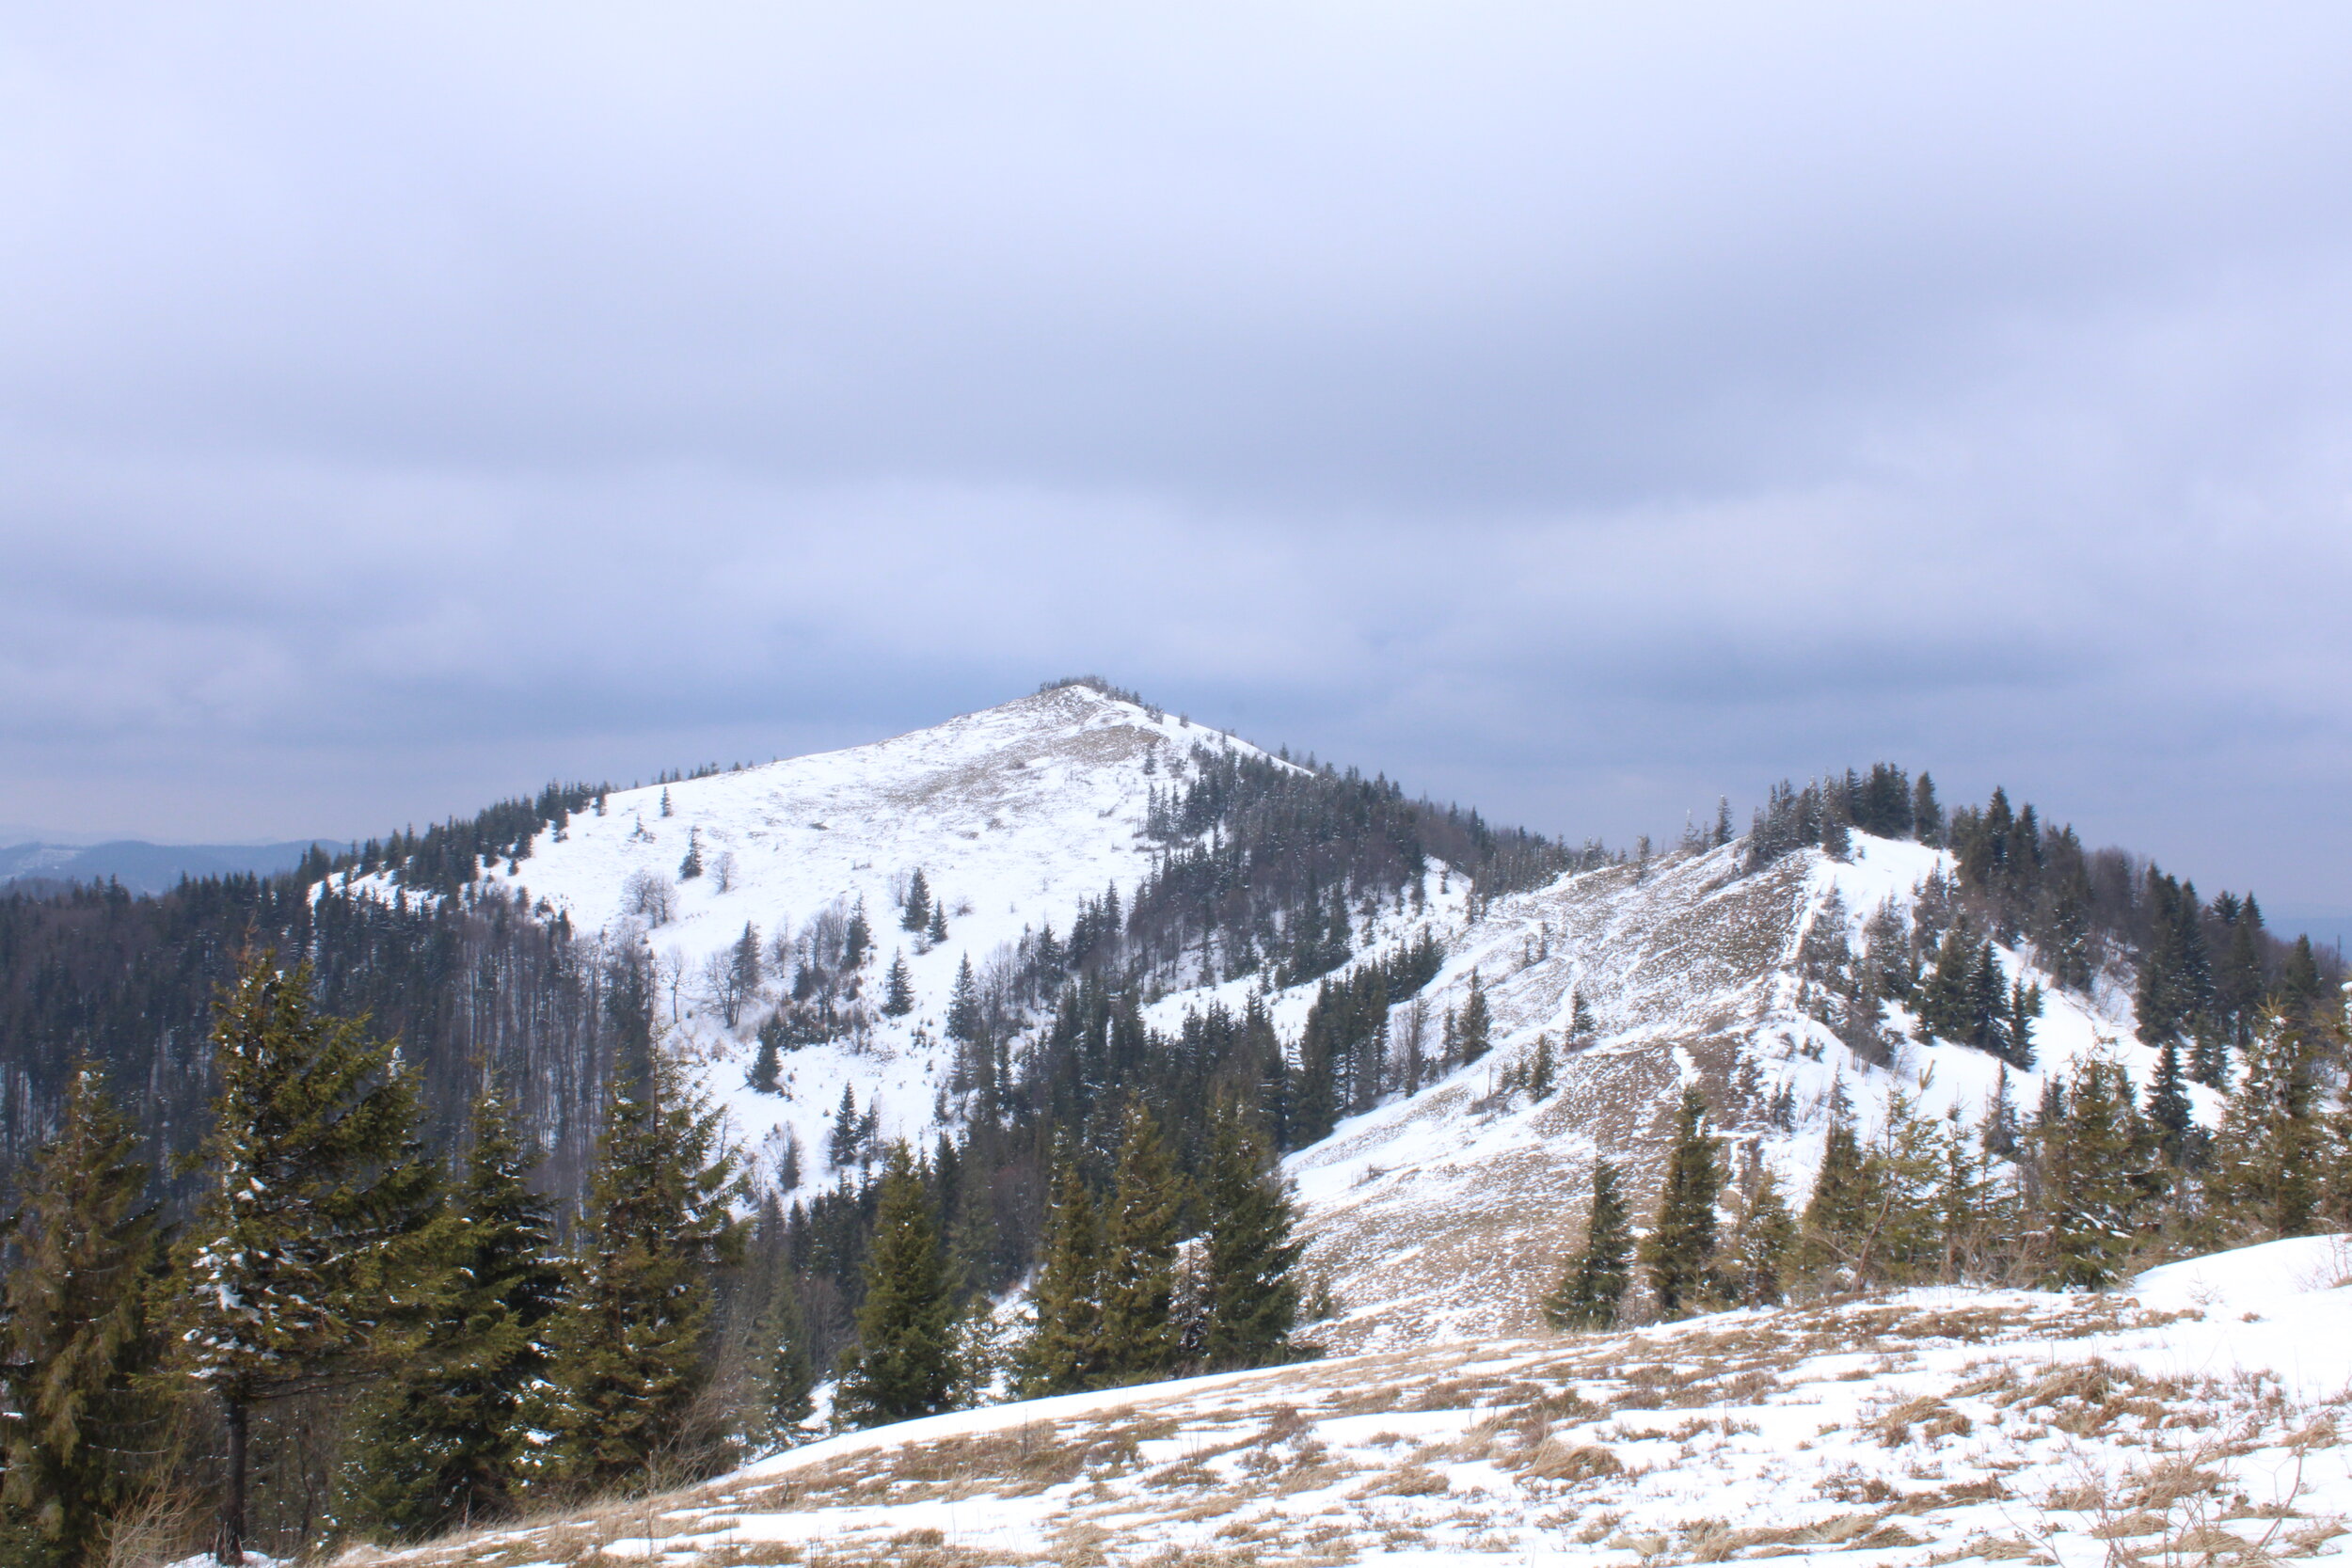 CARPATHIANS, Ukraine. April 16th 2021. PICTURED: Mount Parashka sits covered in April snow, 1280 meters above sea level. The Carpathian Mountains are a UNESCO Natural Heritage Site, and geologically-considered at the very center point of the European continent.